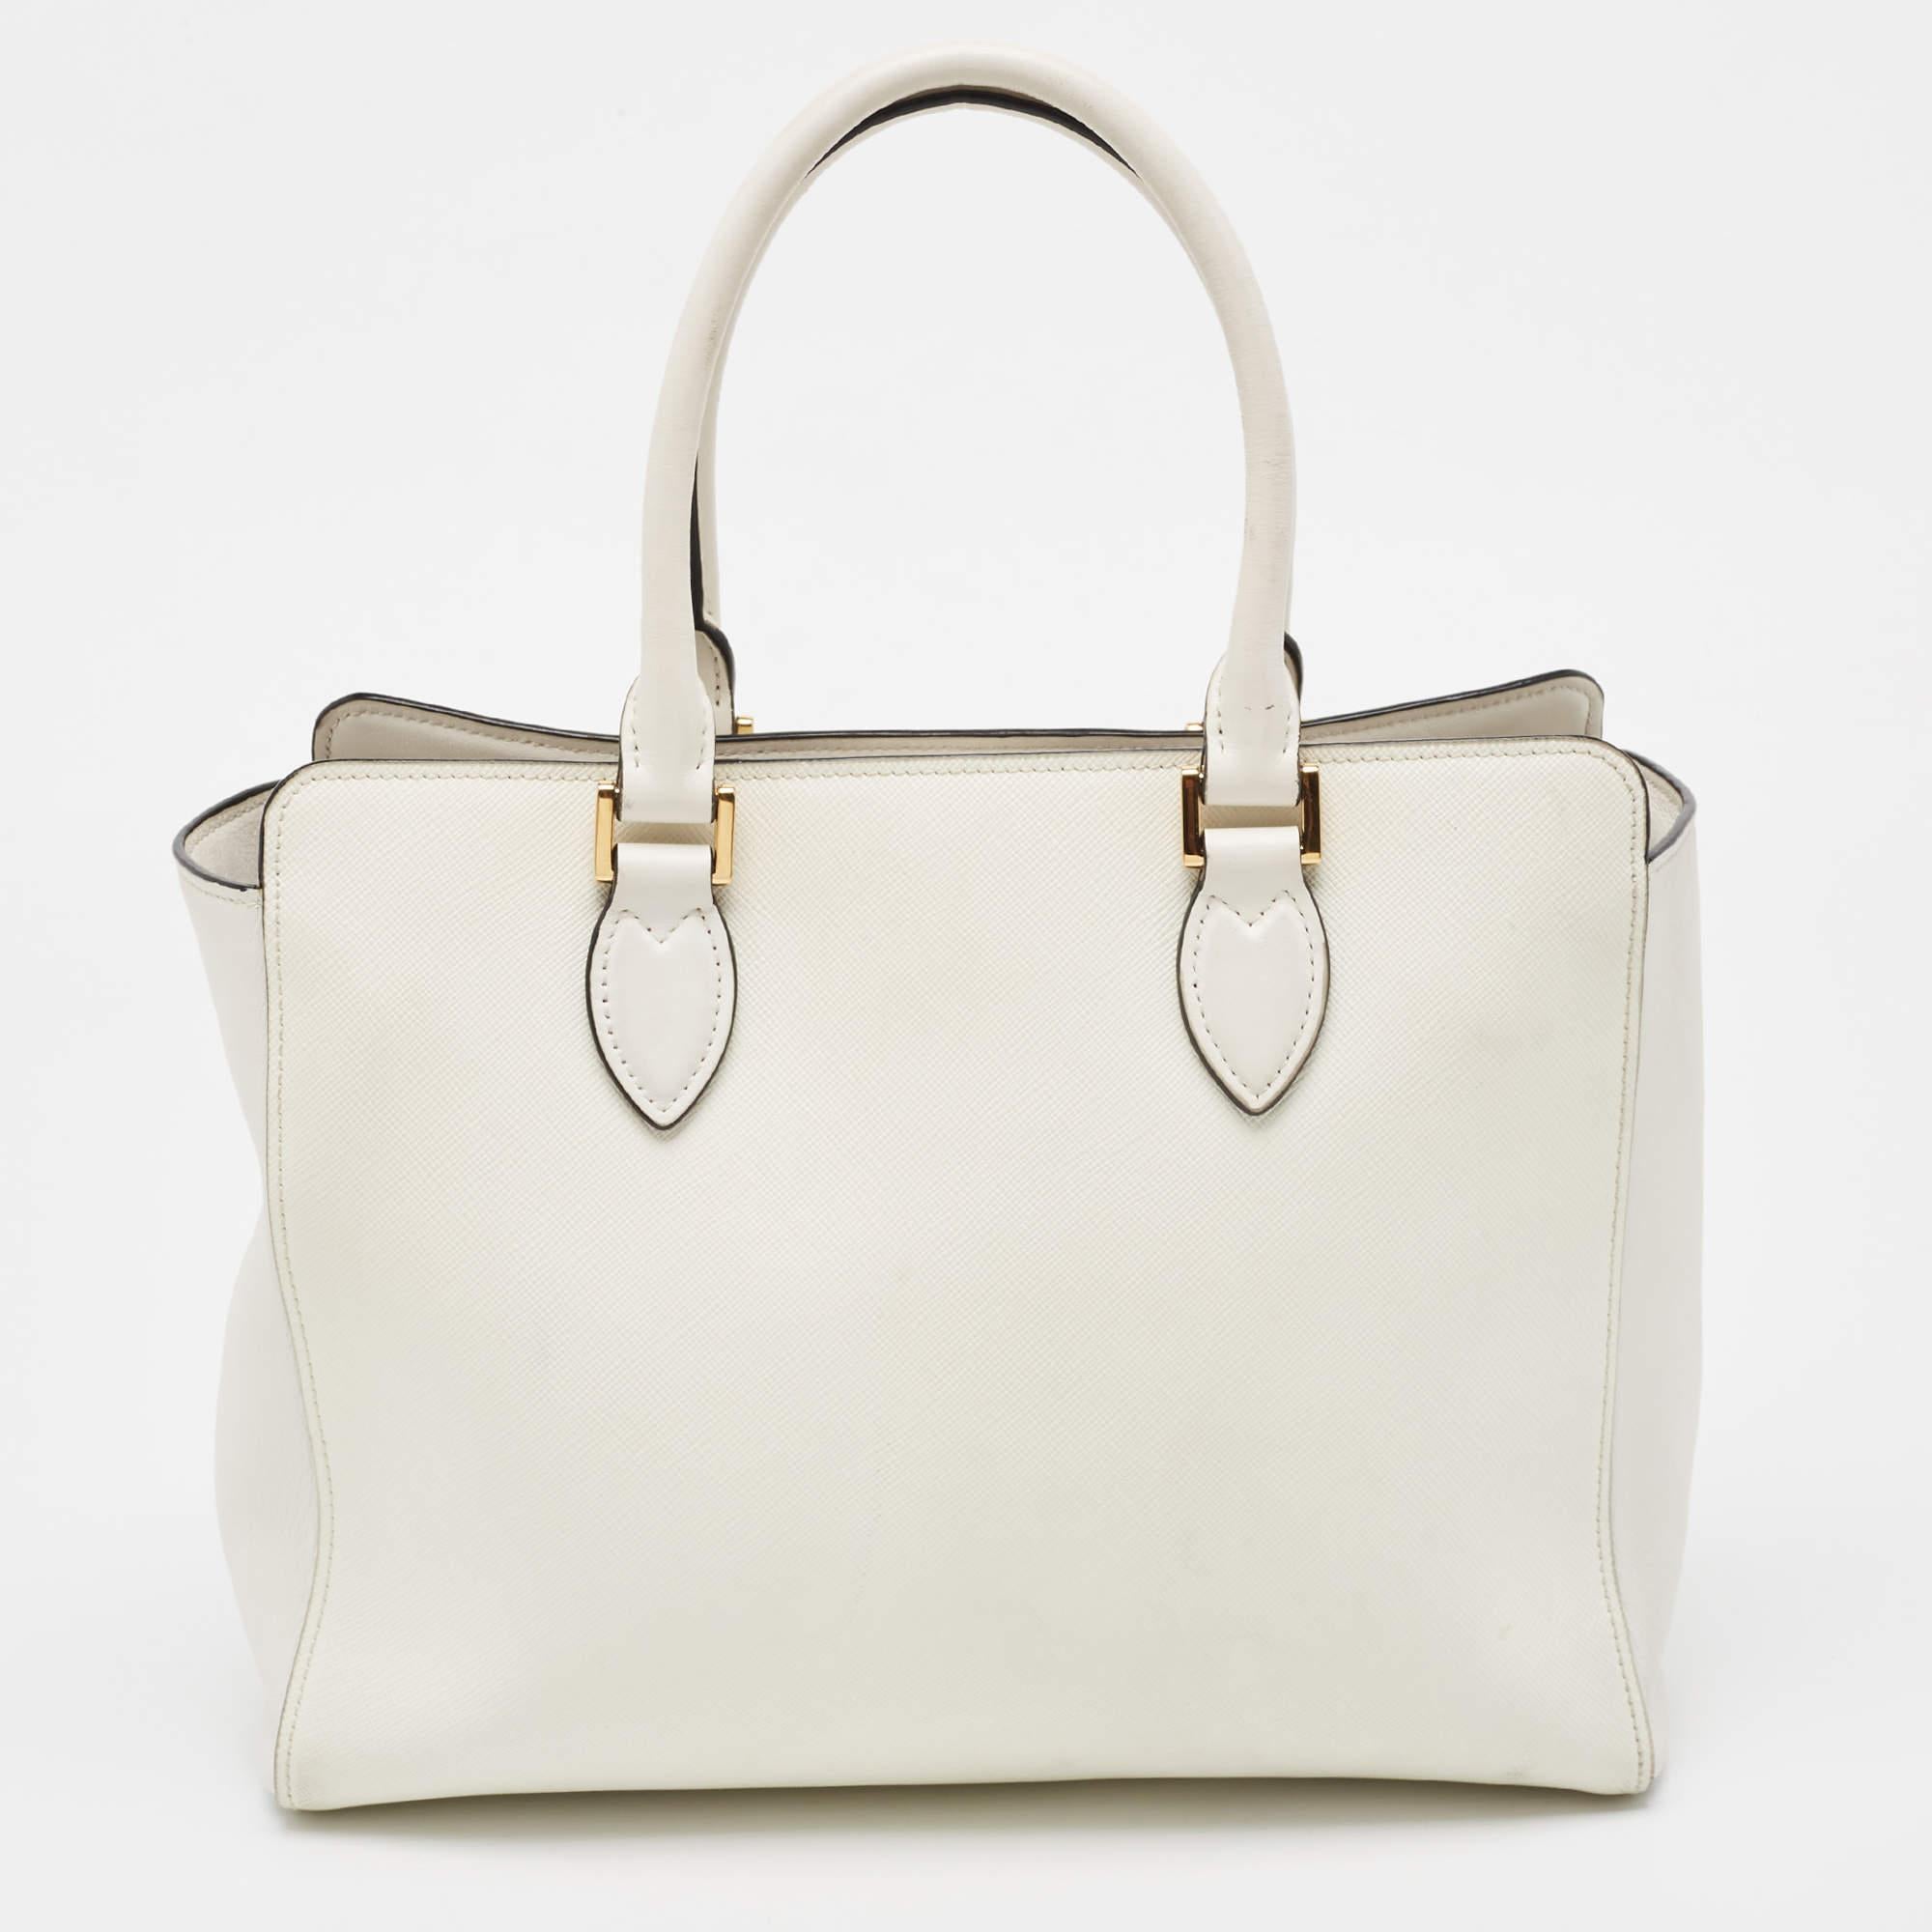 Striking a beautiful balance between essentiality and opulence, this tote from the House of Prada ensures that your handbag requirements are taken care of. It is equipped with practical features for all-day ease.

Includes: Authenticity Card, Info